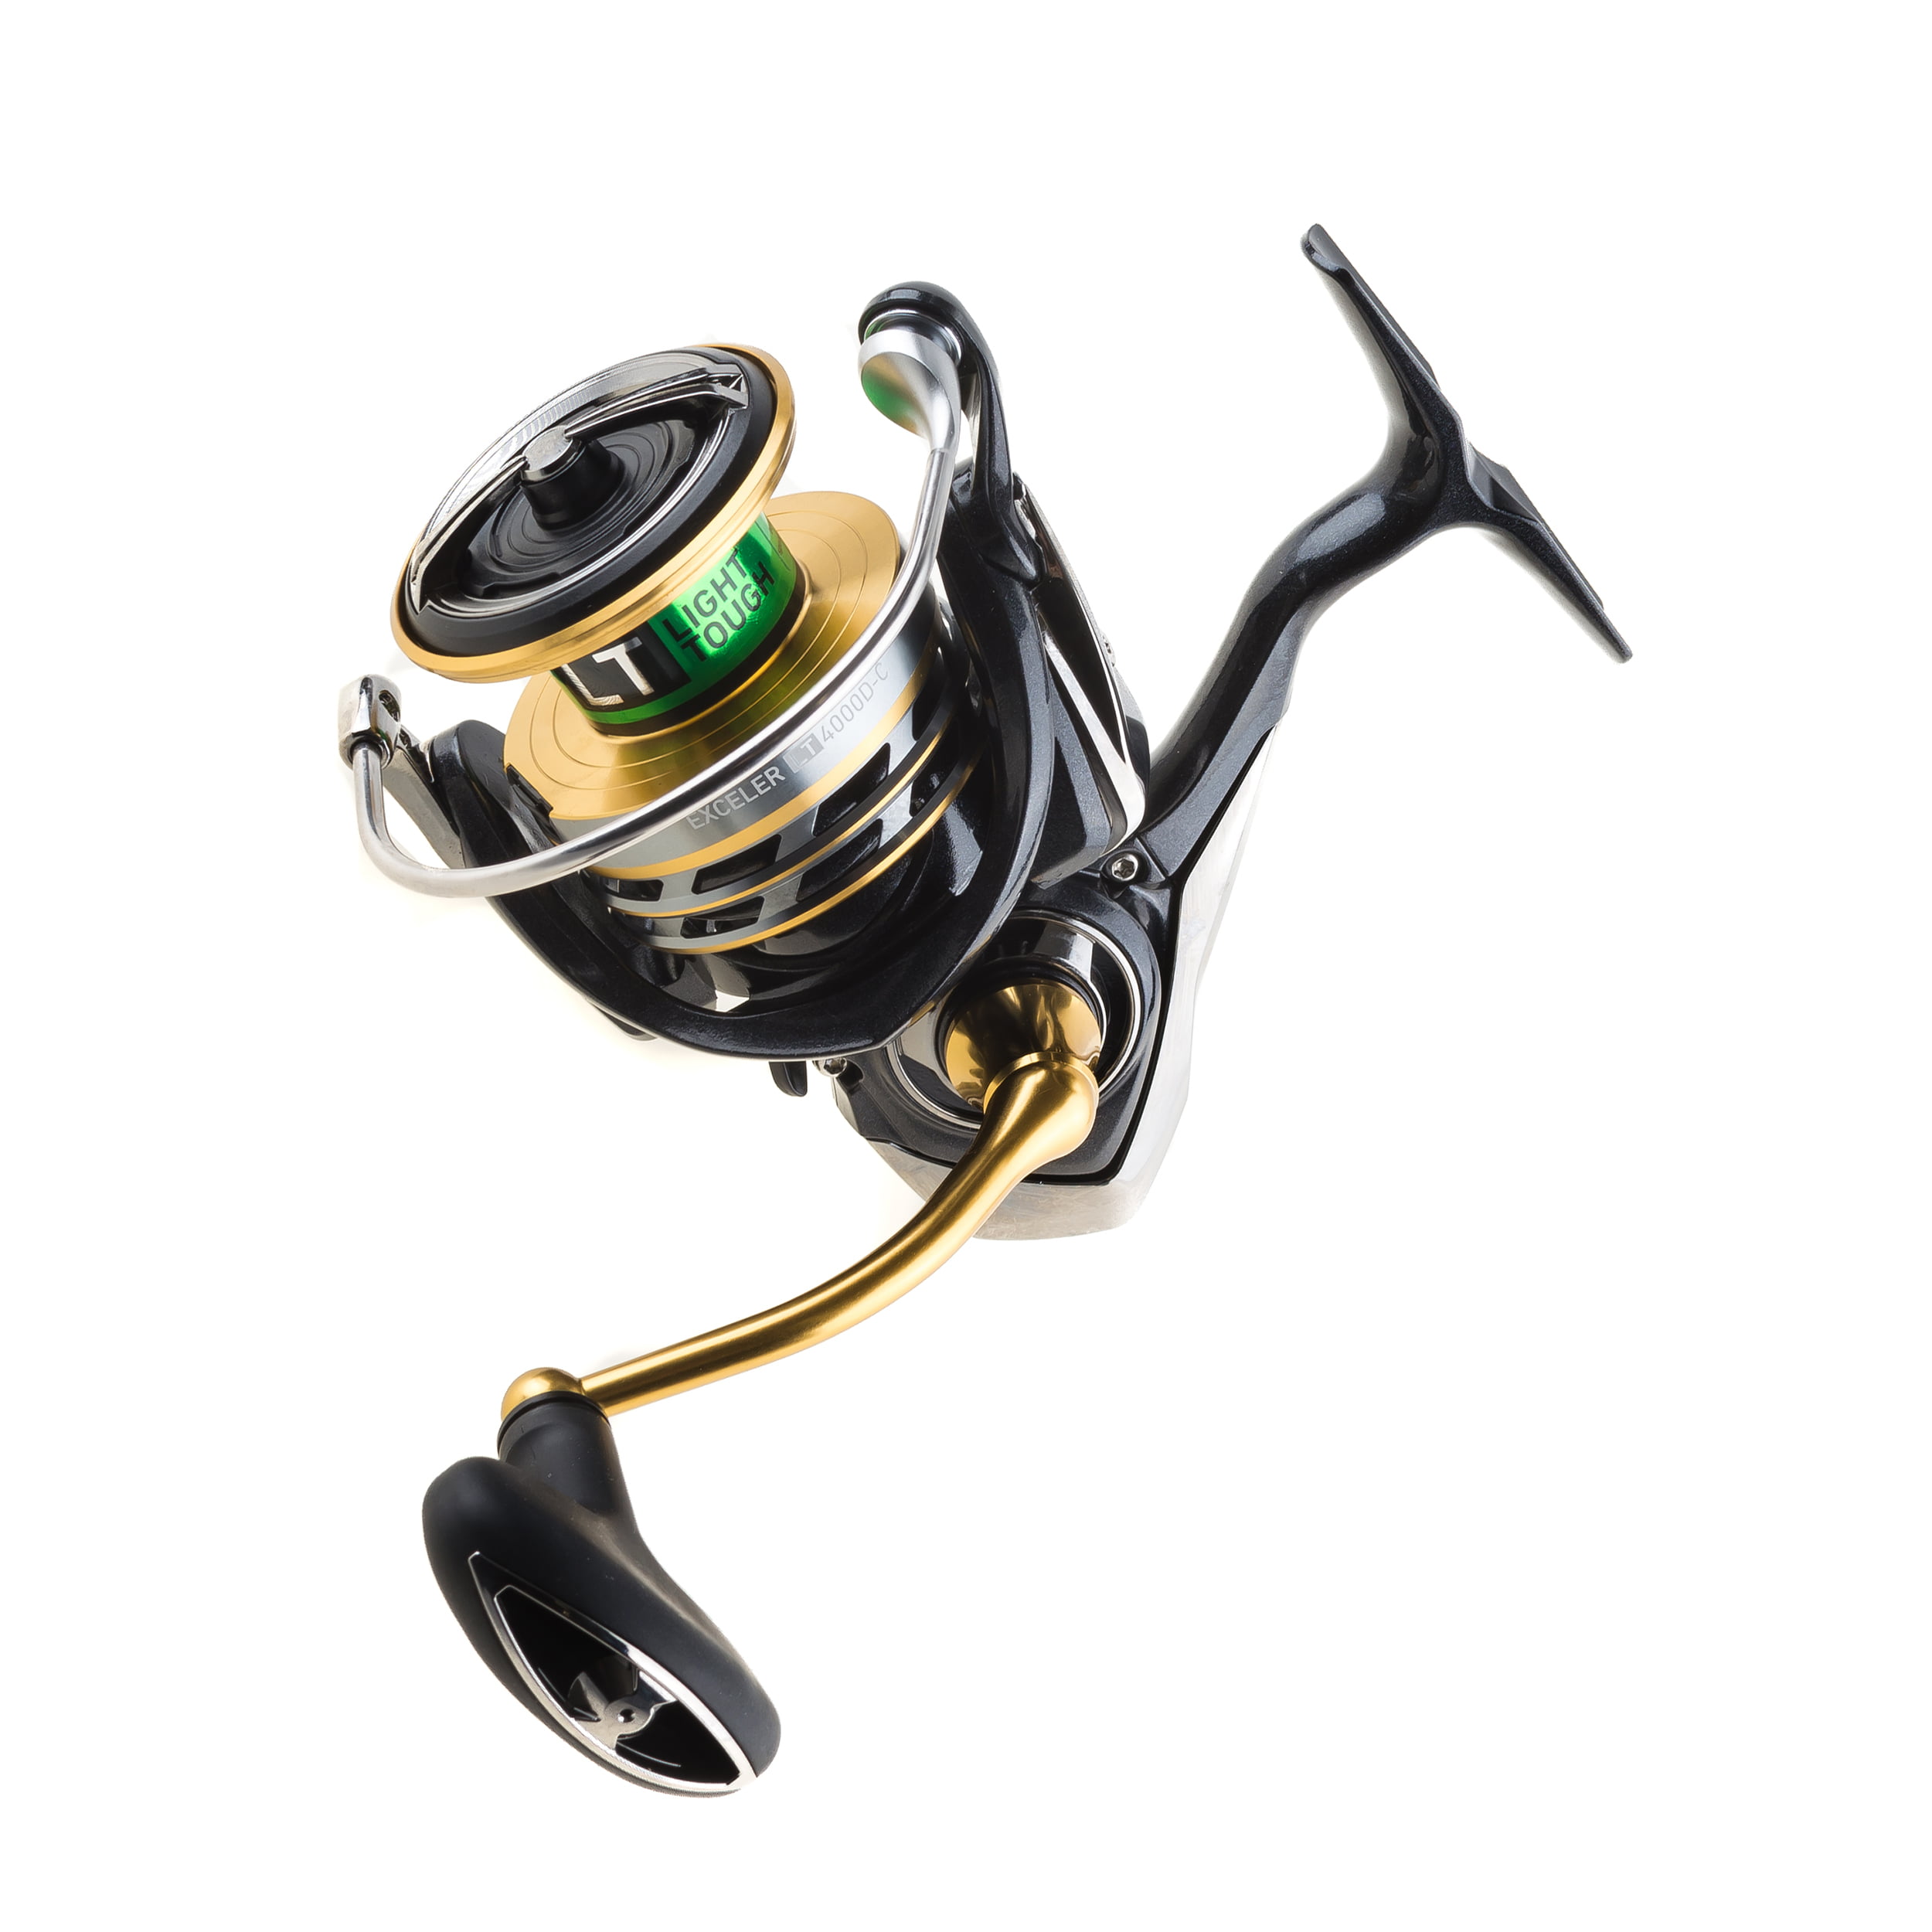 Details about   DAIWA SPINNING REEL PART L90-0301 GS755T Rotor 